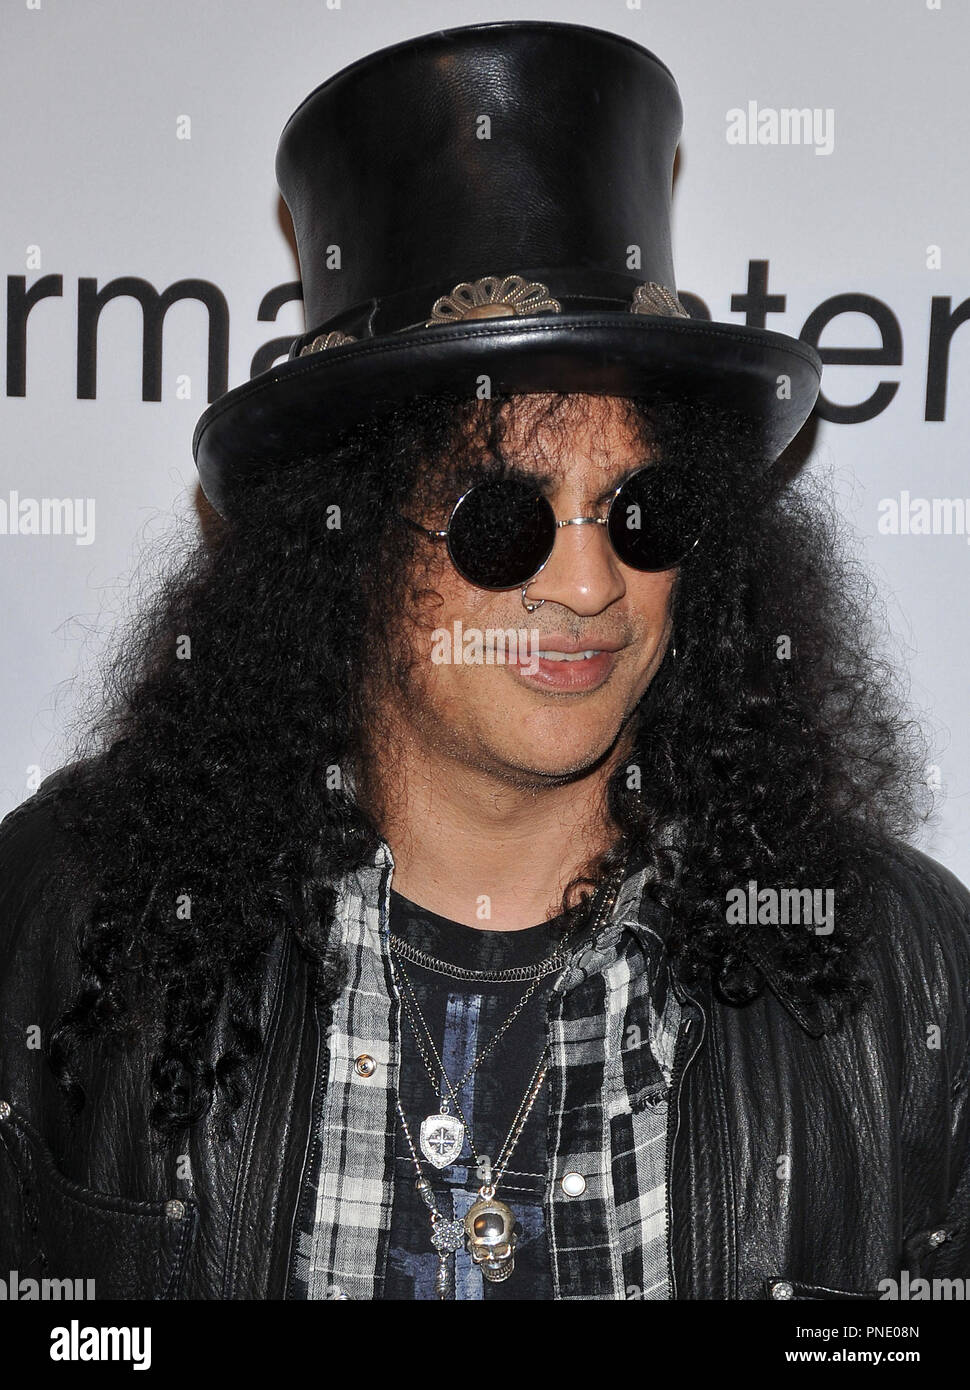 Slash at The Recording Academy and Clive Davis 2010 Pre-Grammy Gala held at the Beverly Hilton Hotel in Beverly Hills, CA. The event took place on Saturday, January 30, 2010. Photo by PRPP Pacific Rim Photo Press. /PictureLux File Reference # Slash 13010 2PLX   For Editorial Use Only -  All Rights Reserved Stock Photo